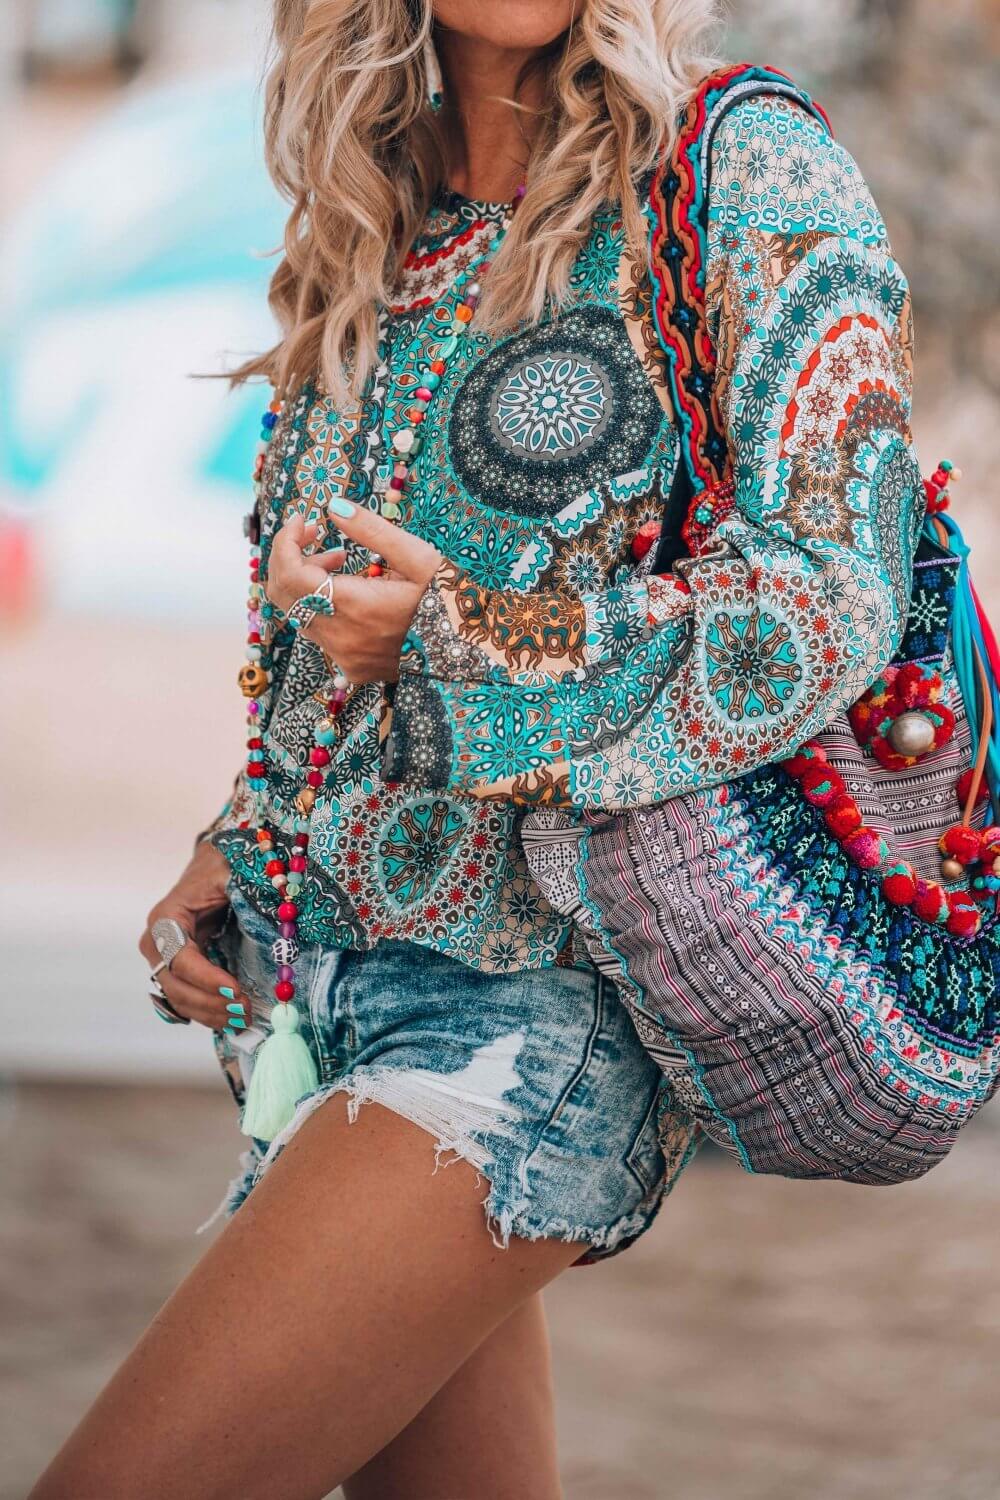 That colourful bohemian tunic that got everybody talking!